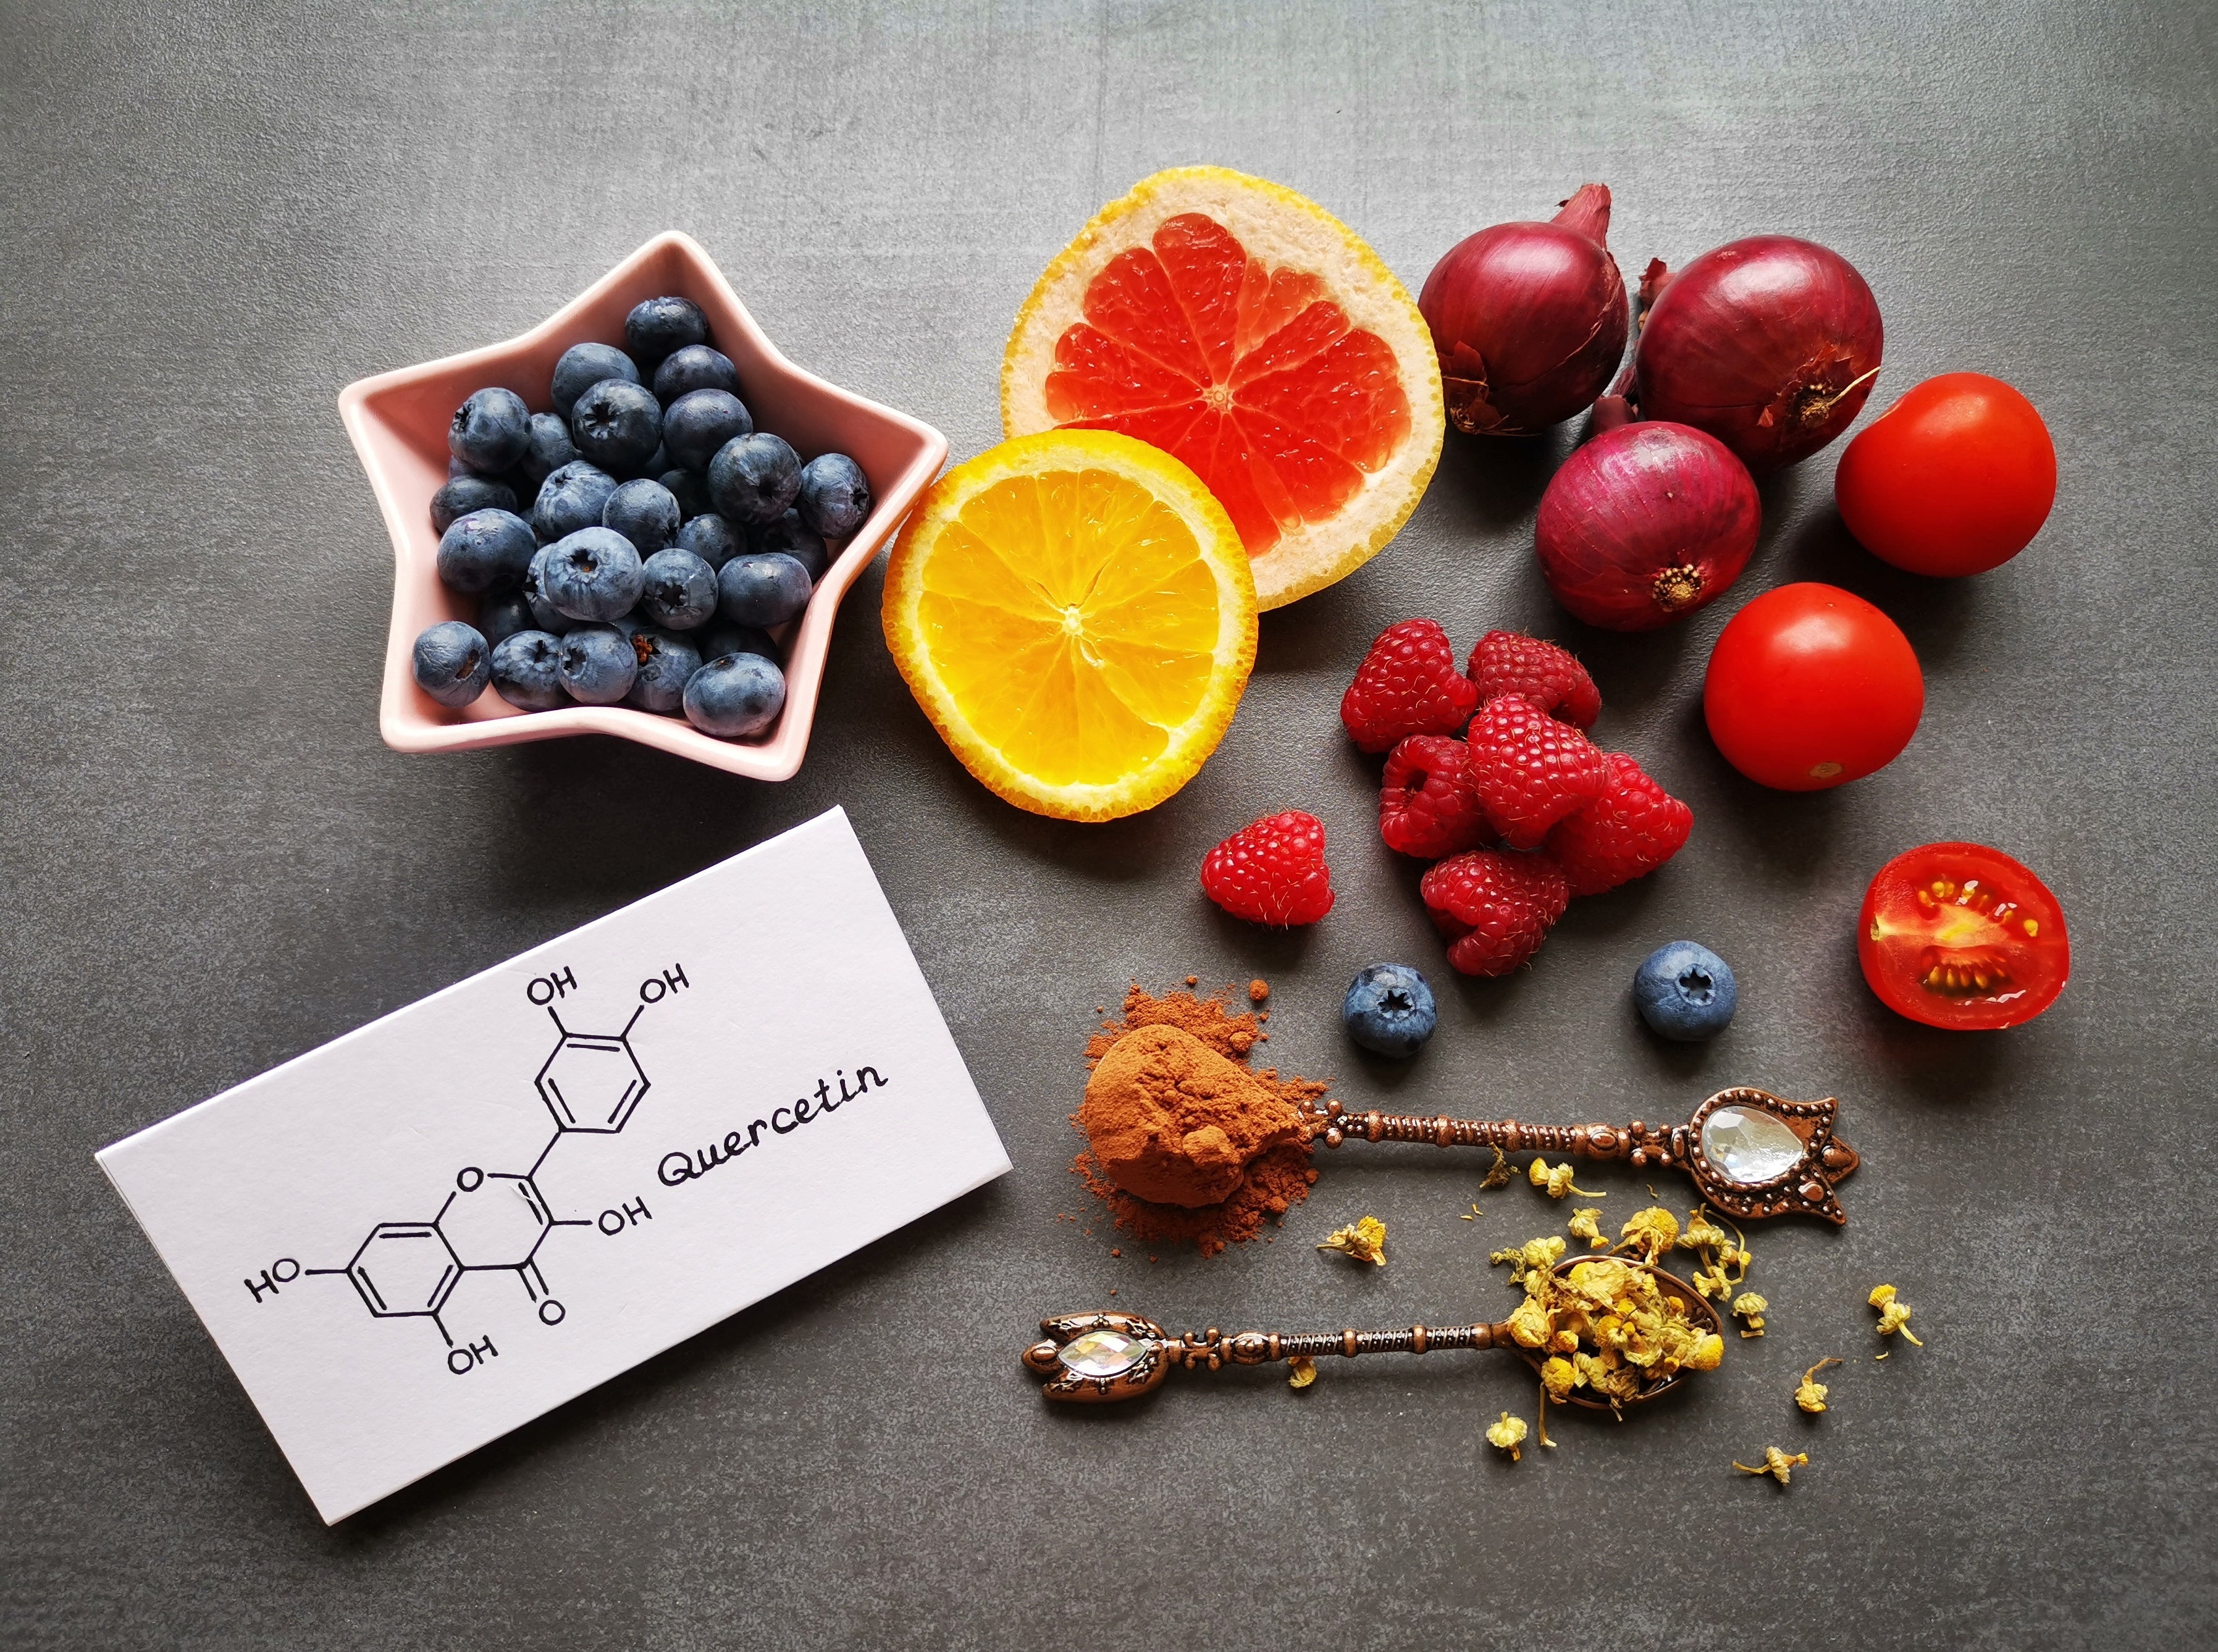 Quercetin: The Natural Flavonoid with Immune Support and Antioxidant Benefits